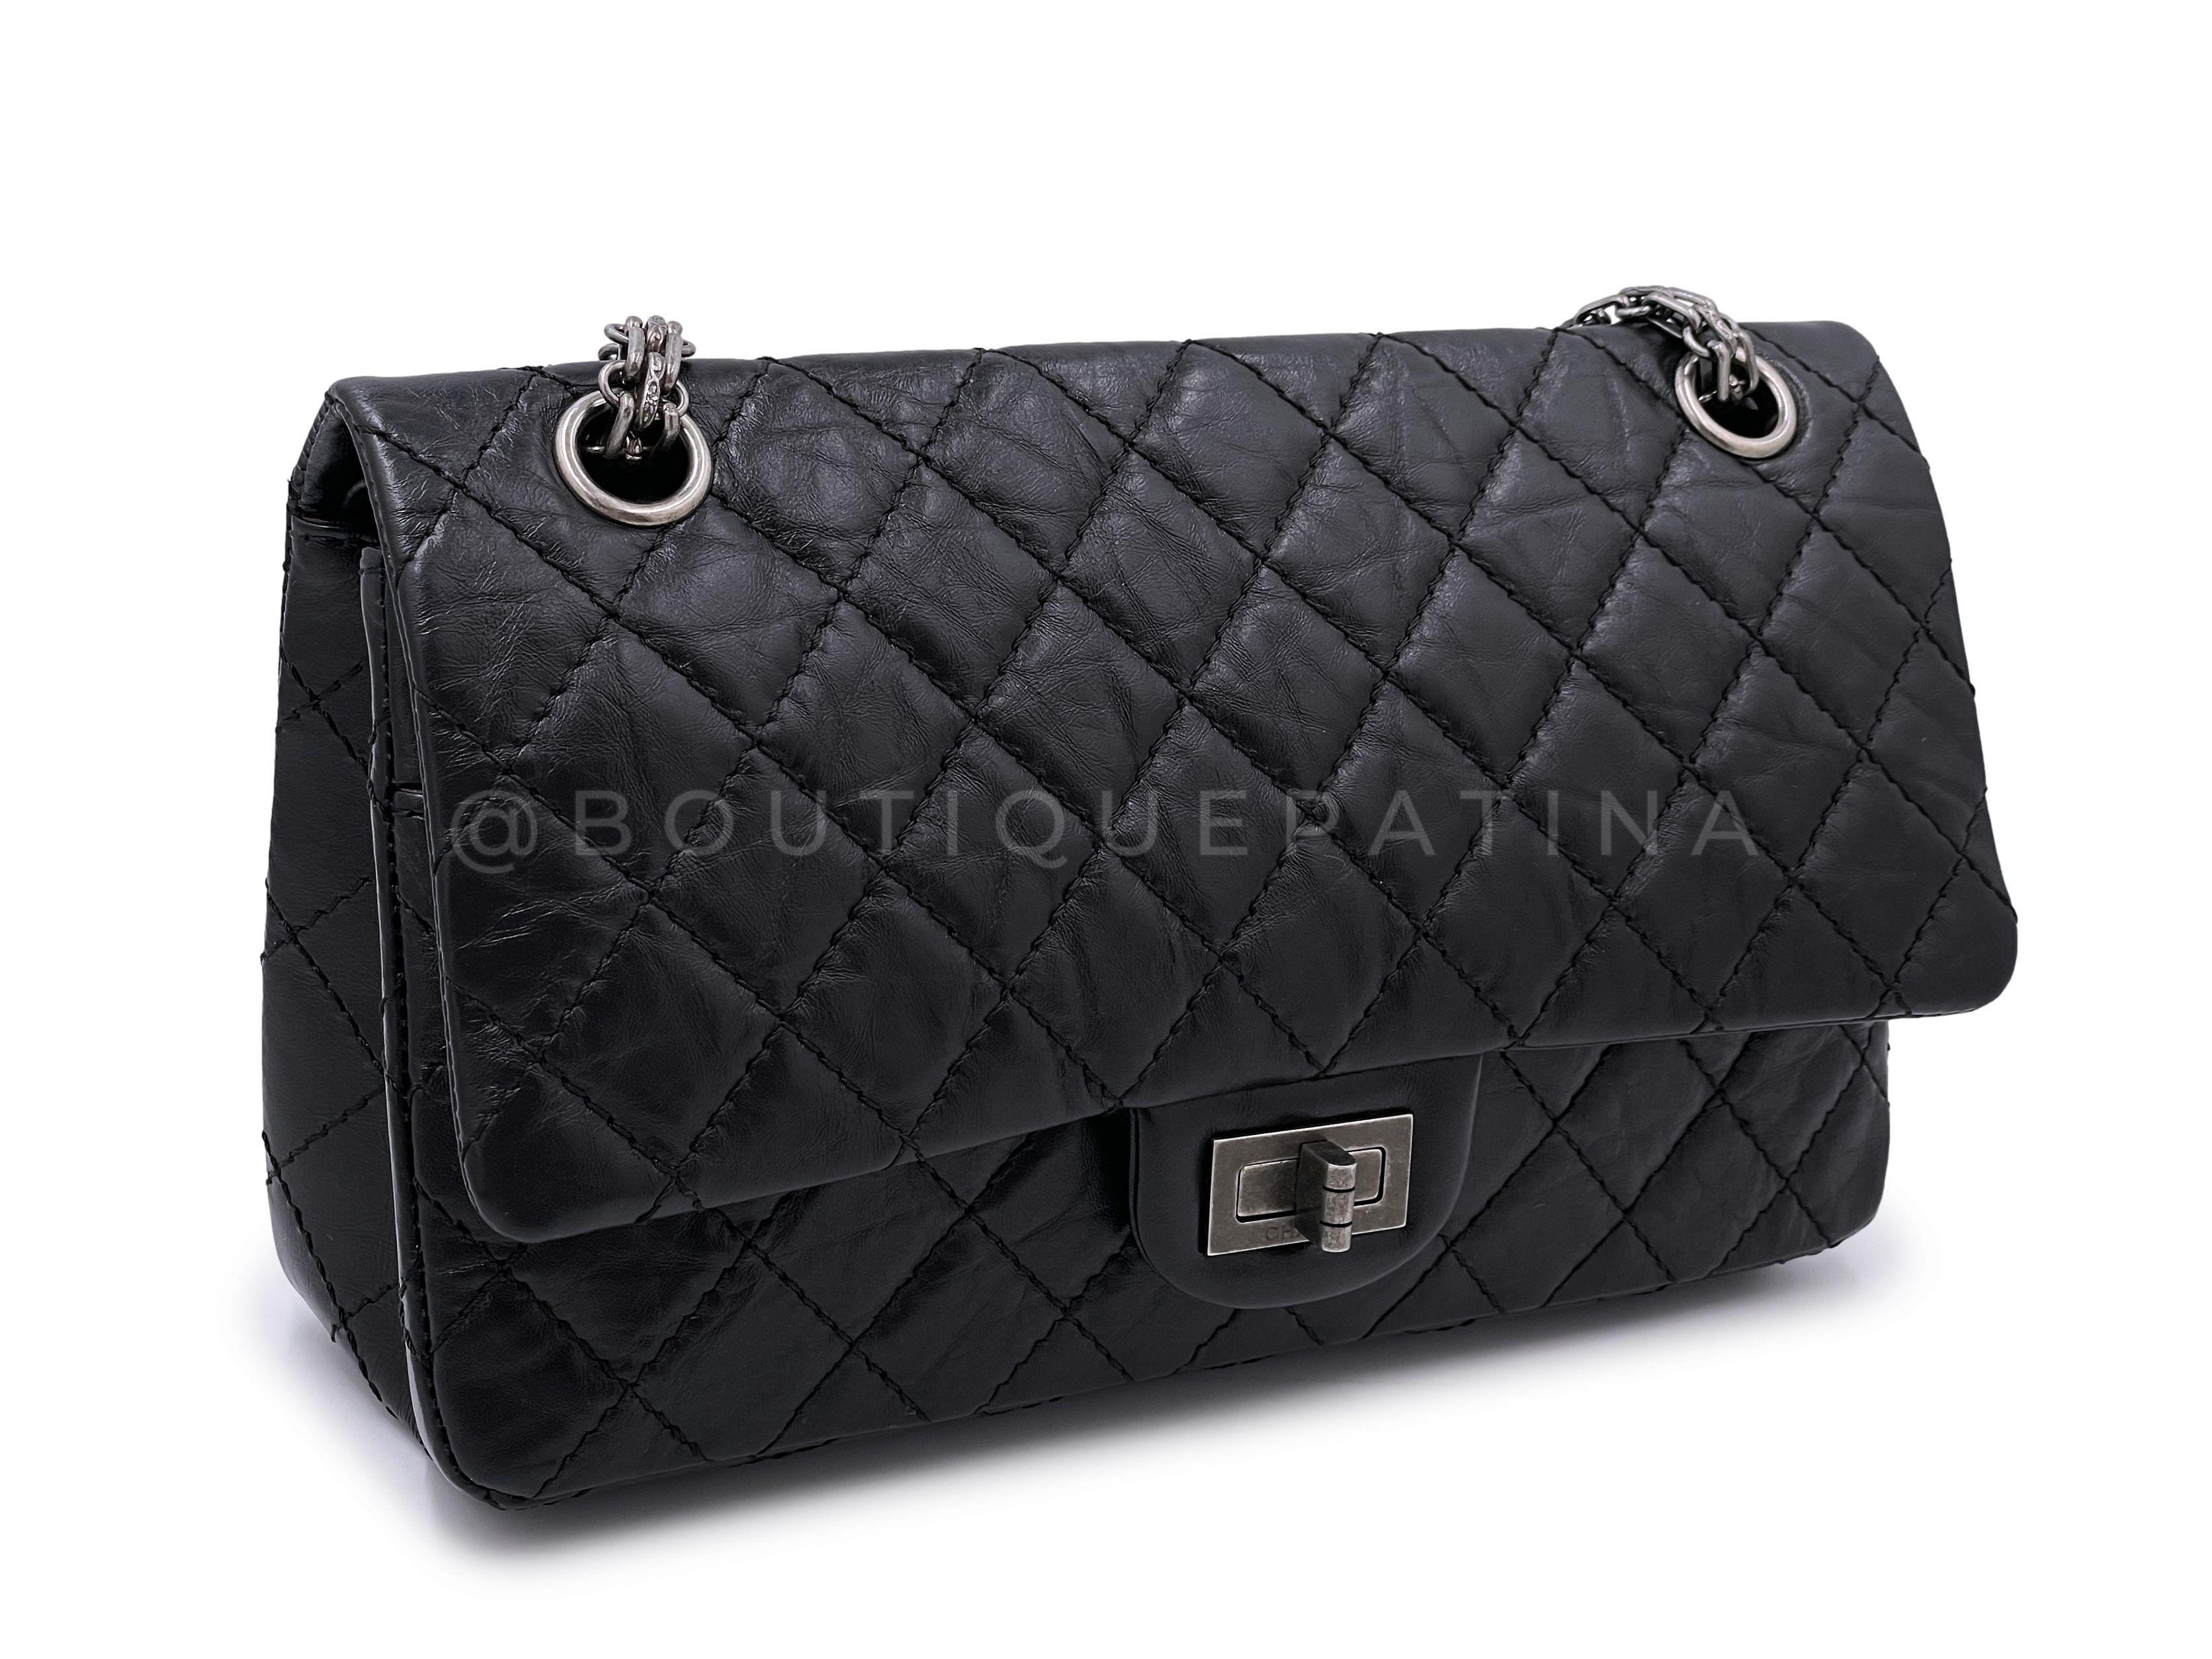 Chanel Black 2.55 Reissue Classic Double Flap Bag RHW 225 66892 In Excellent Condition For Sale In Costa Mesa, CA